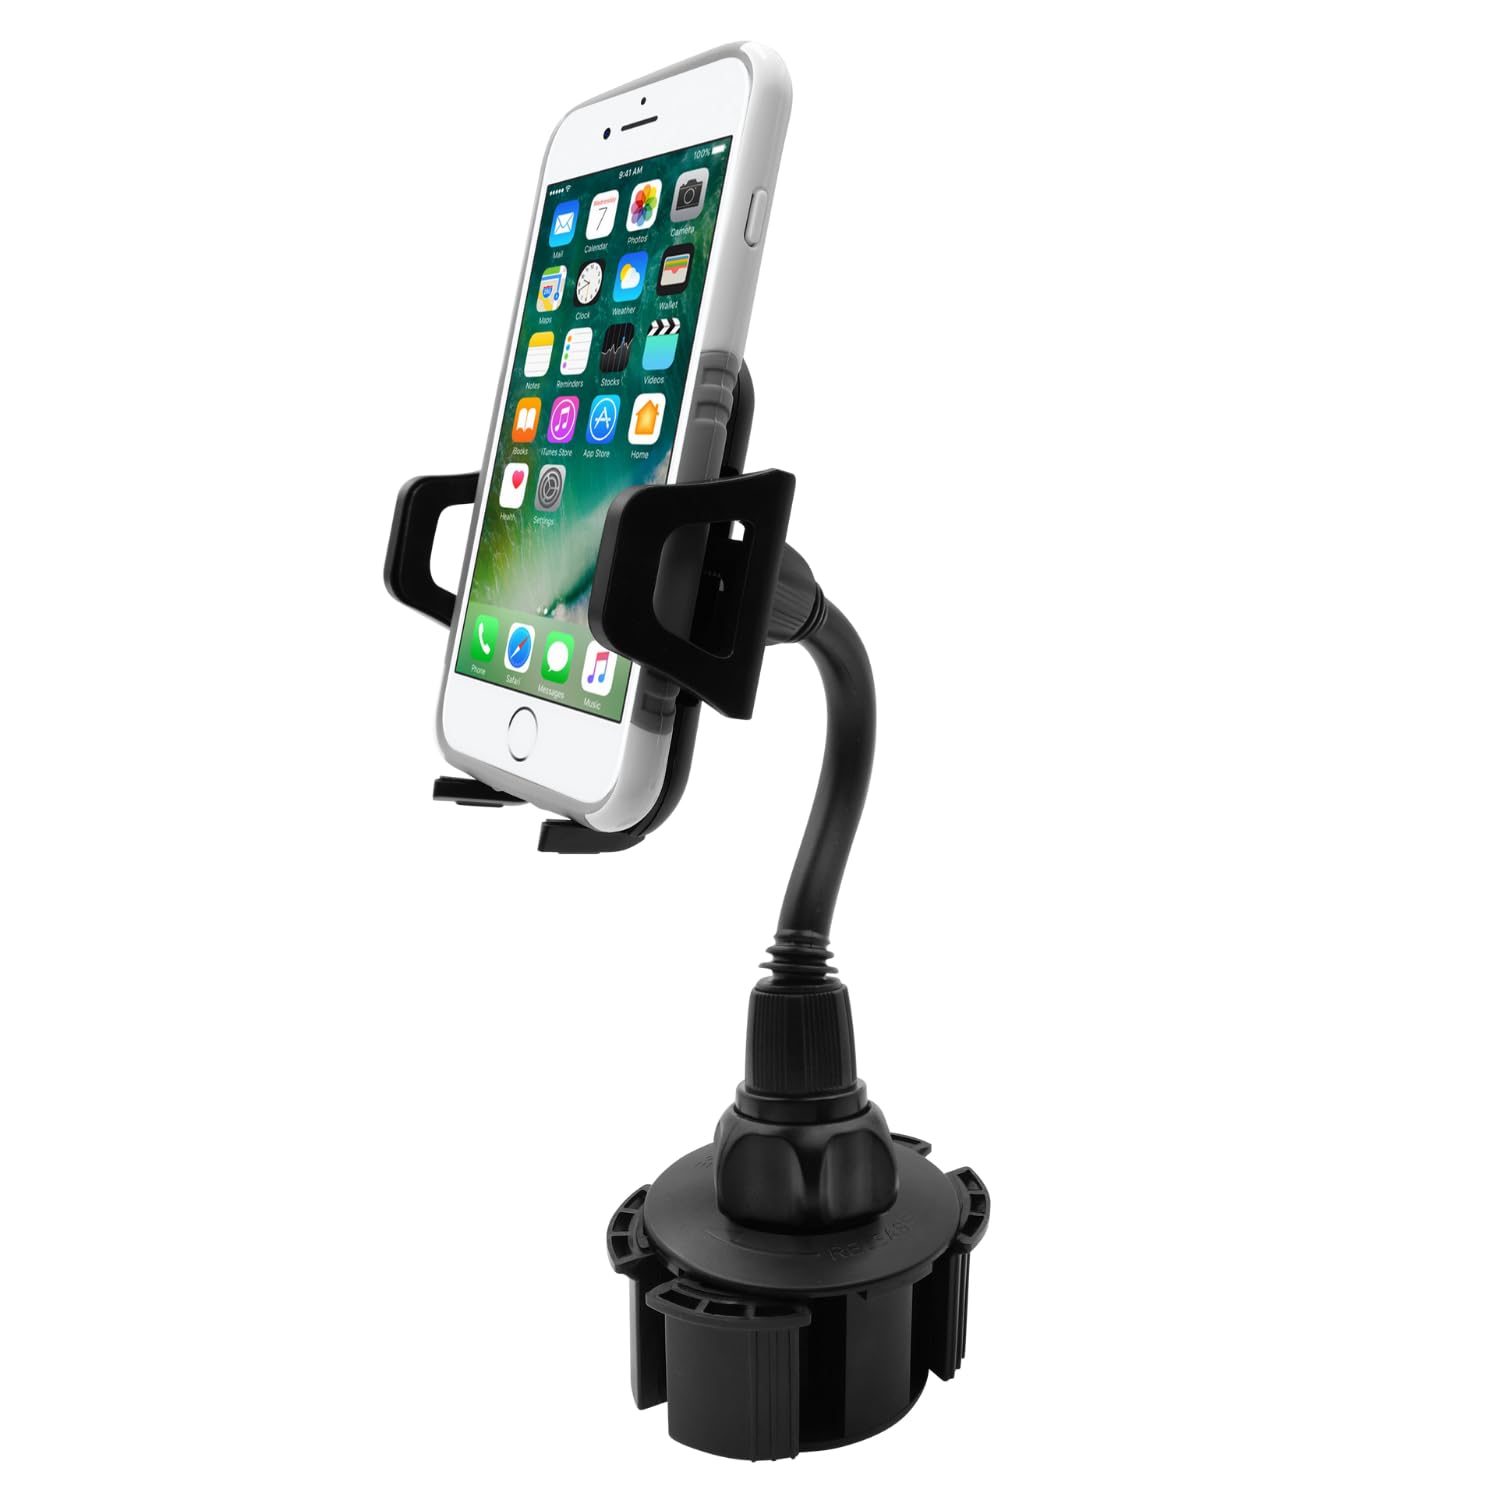 Macally Car Cup Holder Phone Mount - Secure Cupholder Fit for Phones up to 4.1” Wide - Cup Phone Holder for Car with Flexible Gooseneck & 360° Rotatable Cradle - Cell Phone Cup Holder for Car